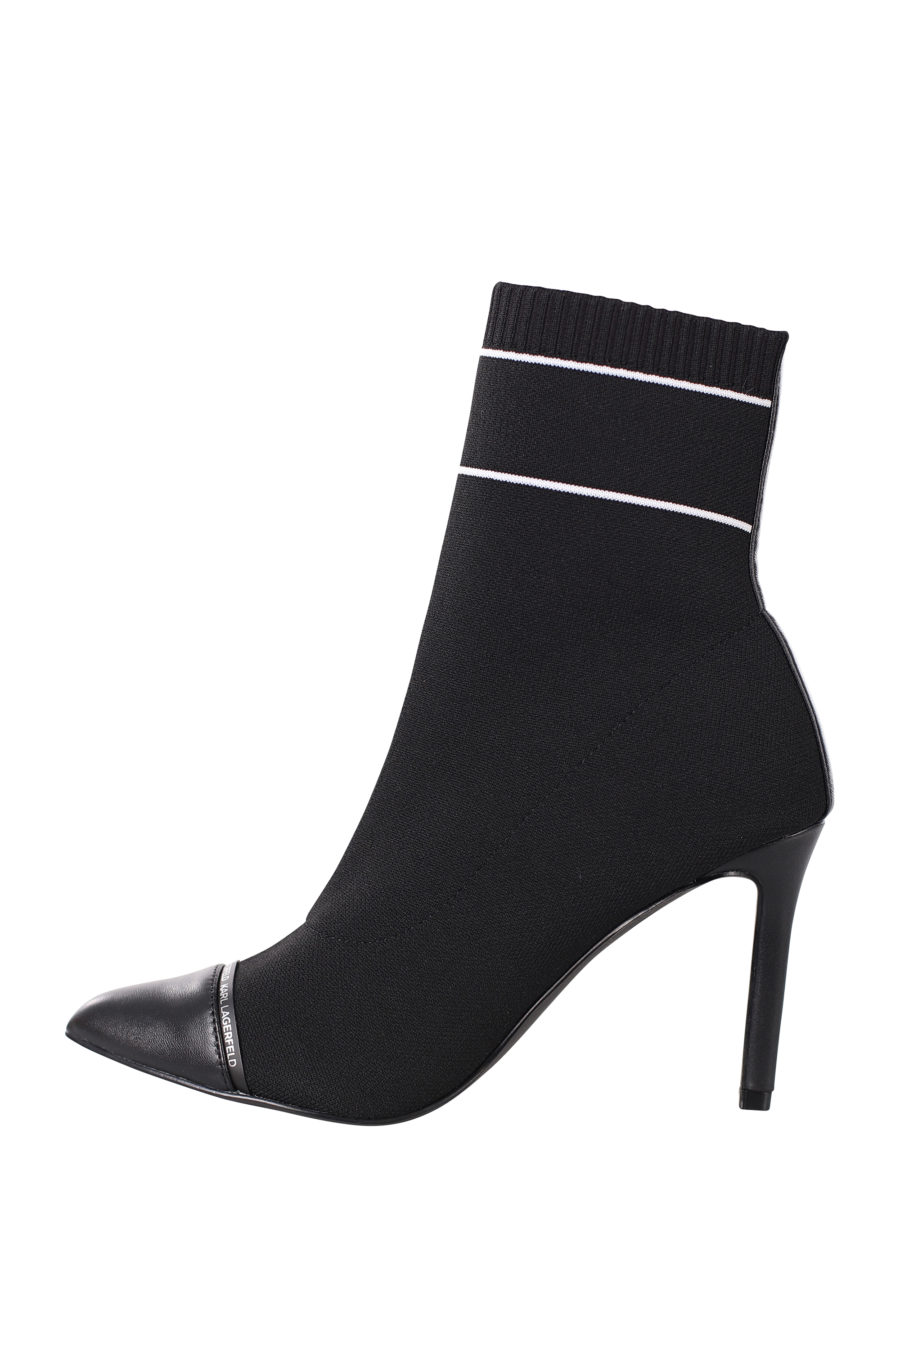 Black ankle sock ankle boots with white logo - IMG 0395